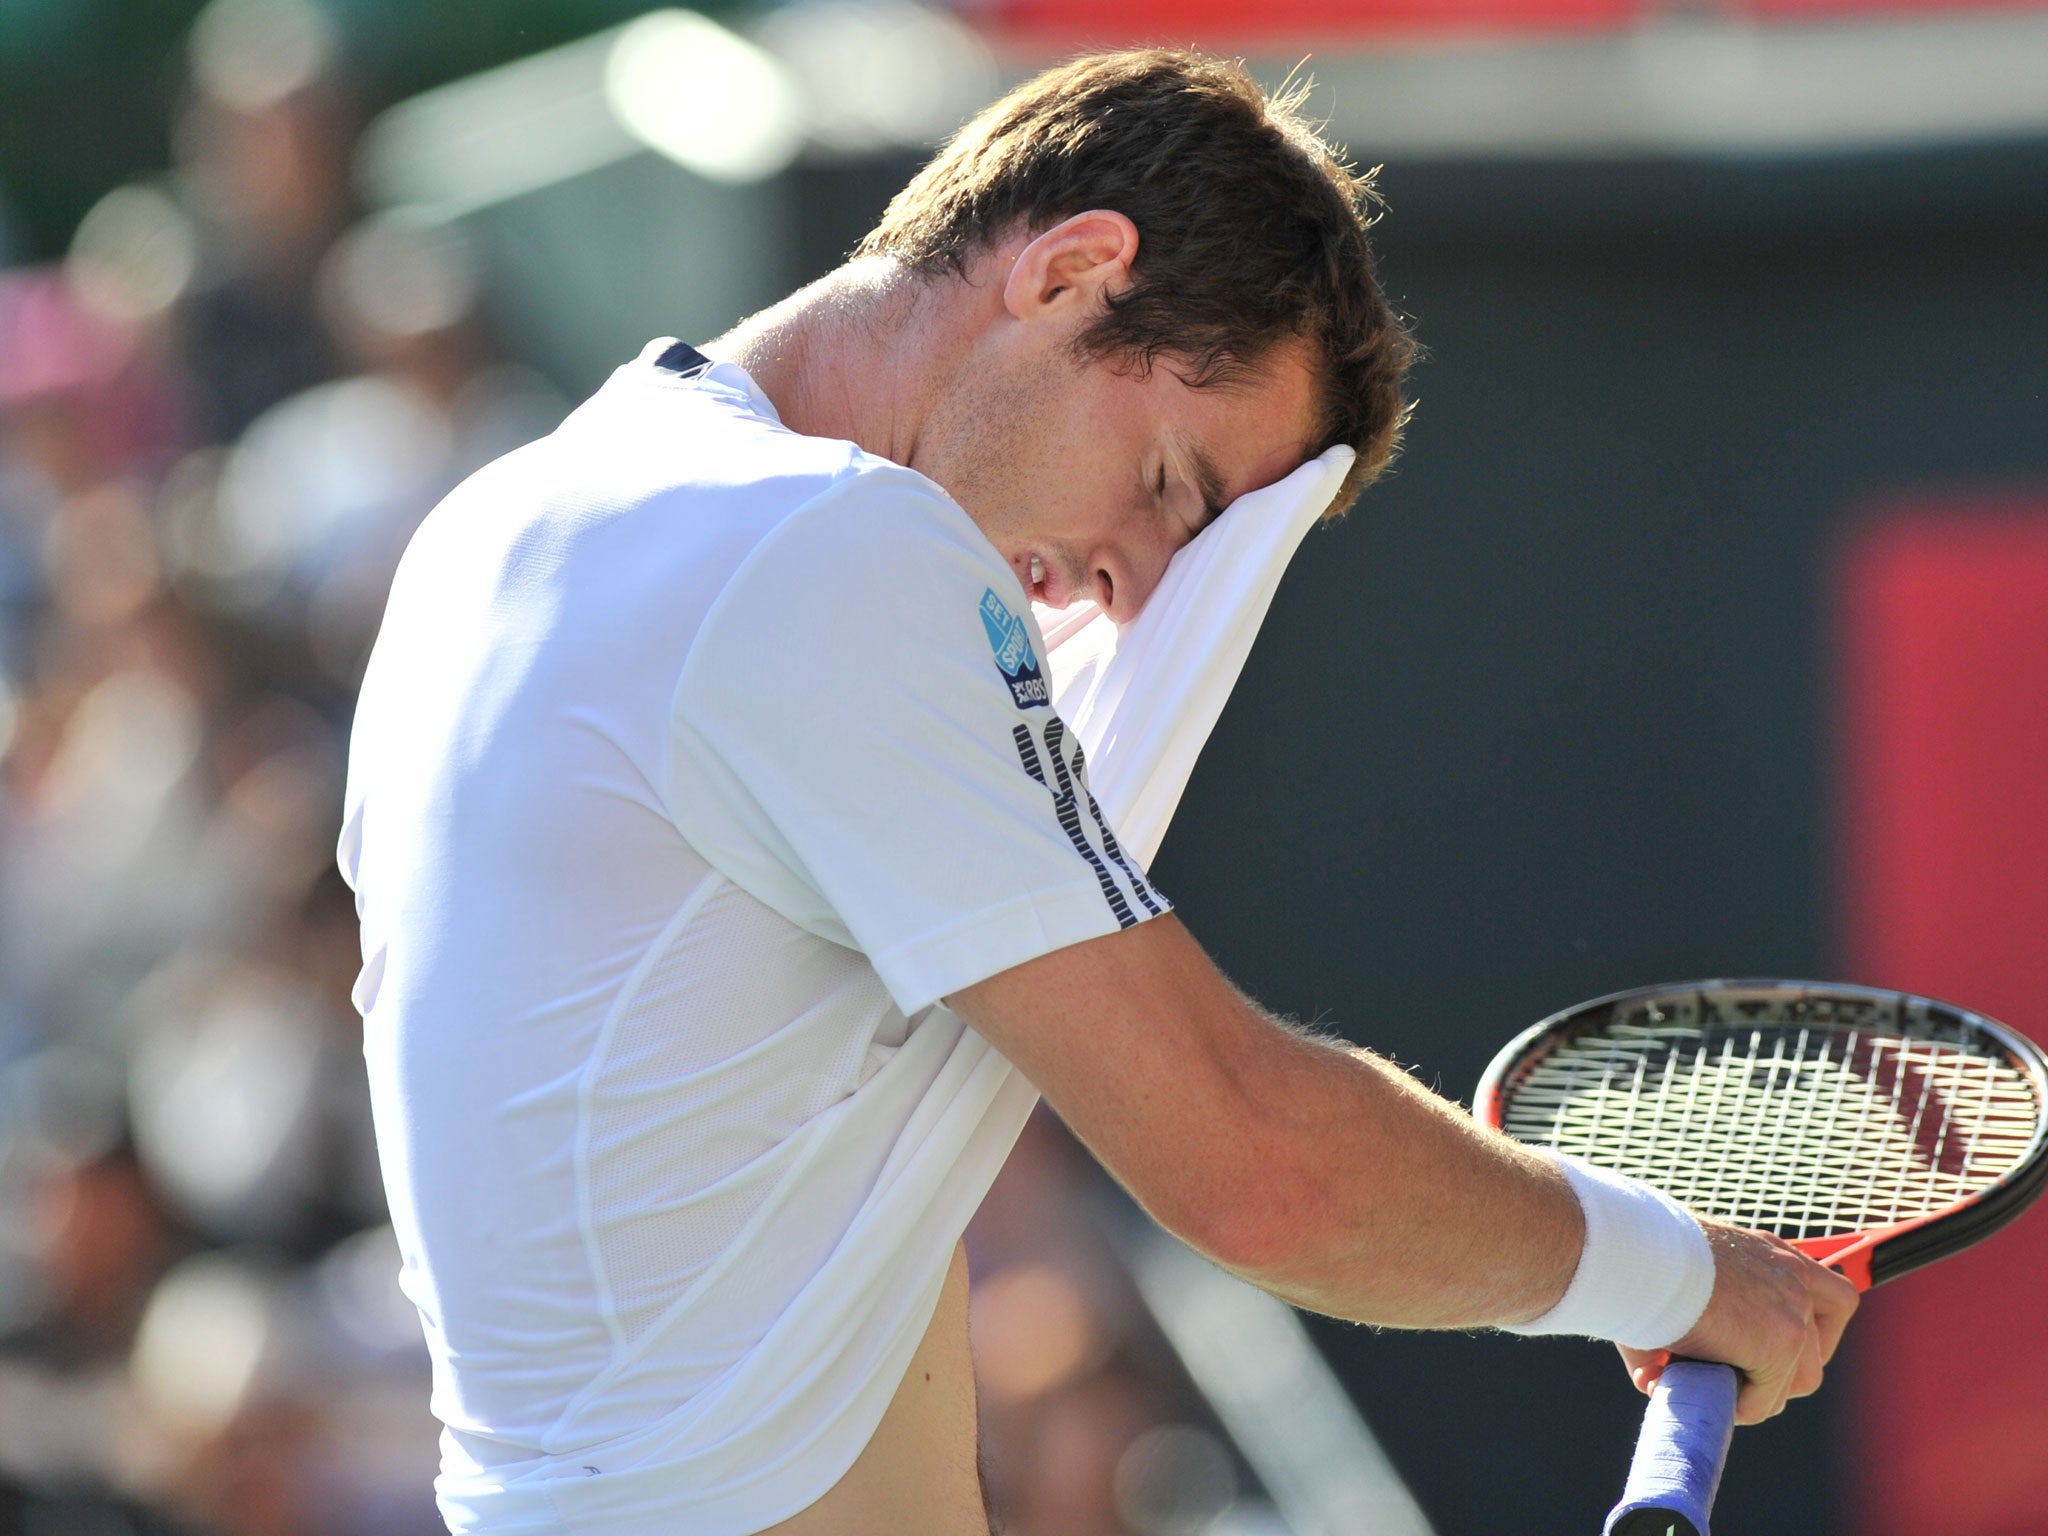 Andy Murray of Britain wipes his sweat during a men's quarter-final match against Stanislas Wawrinka of Switzerland at the Japan Open tennis tournament in Tokyo on October 5, 2012.